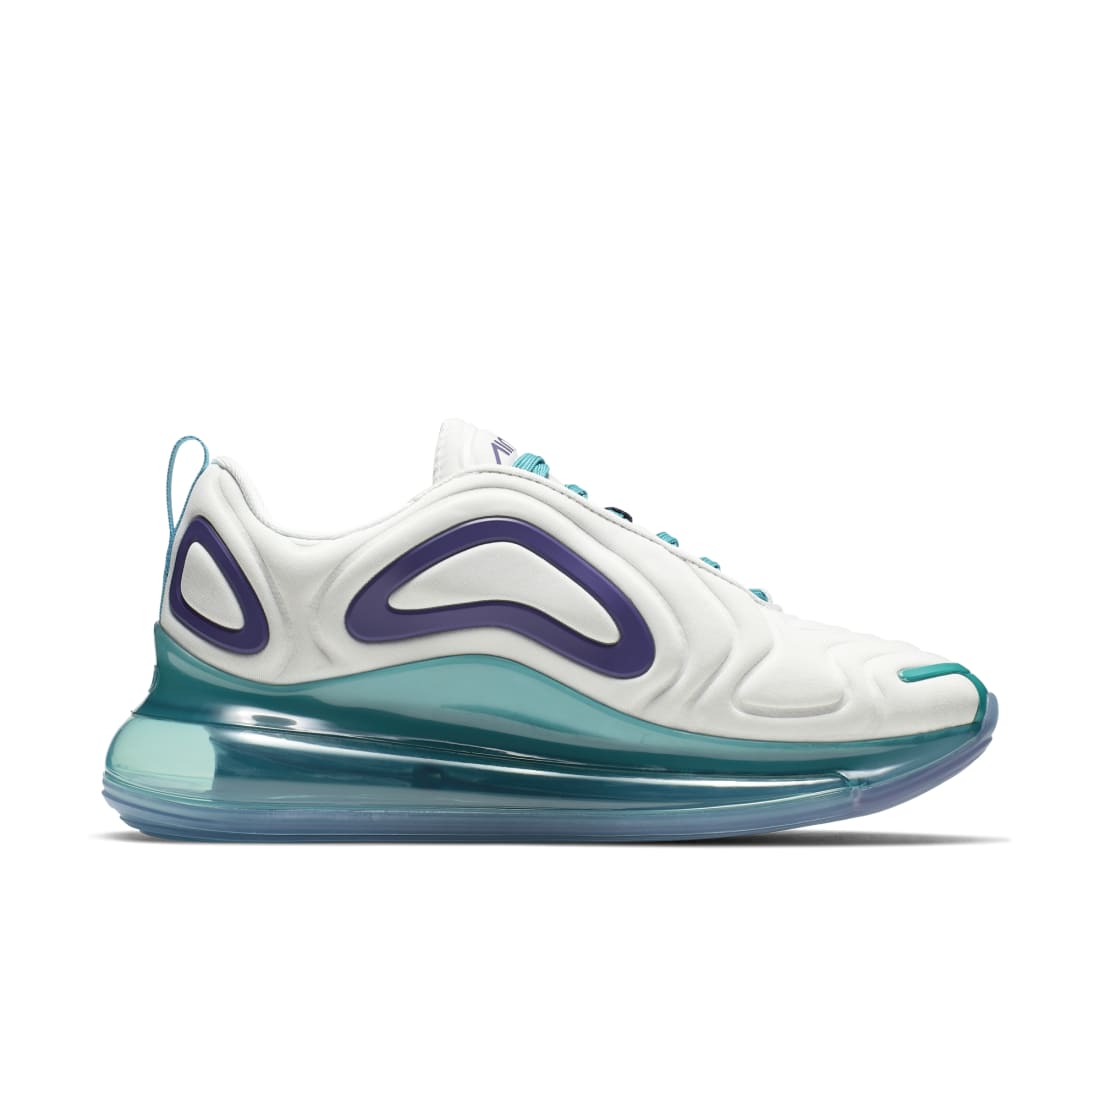 Nike Air Max 720 White Spirit Teal Court Purple | Nike | Release Dates, Sneaker & Collaborations